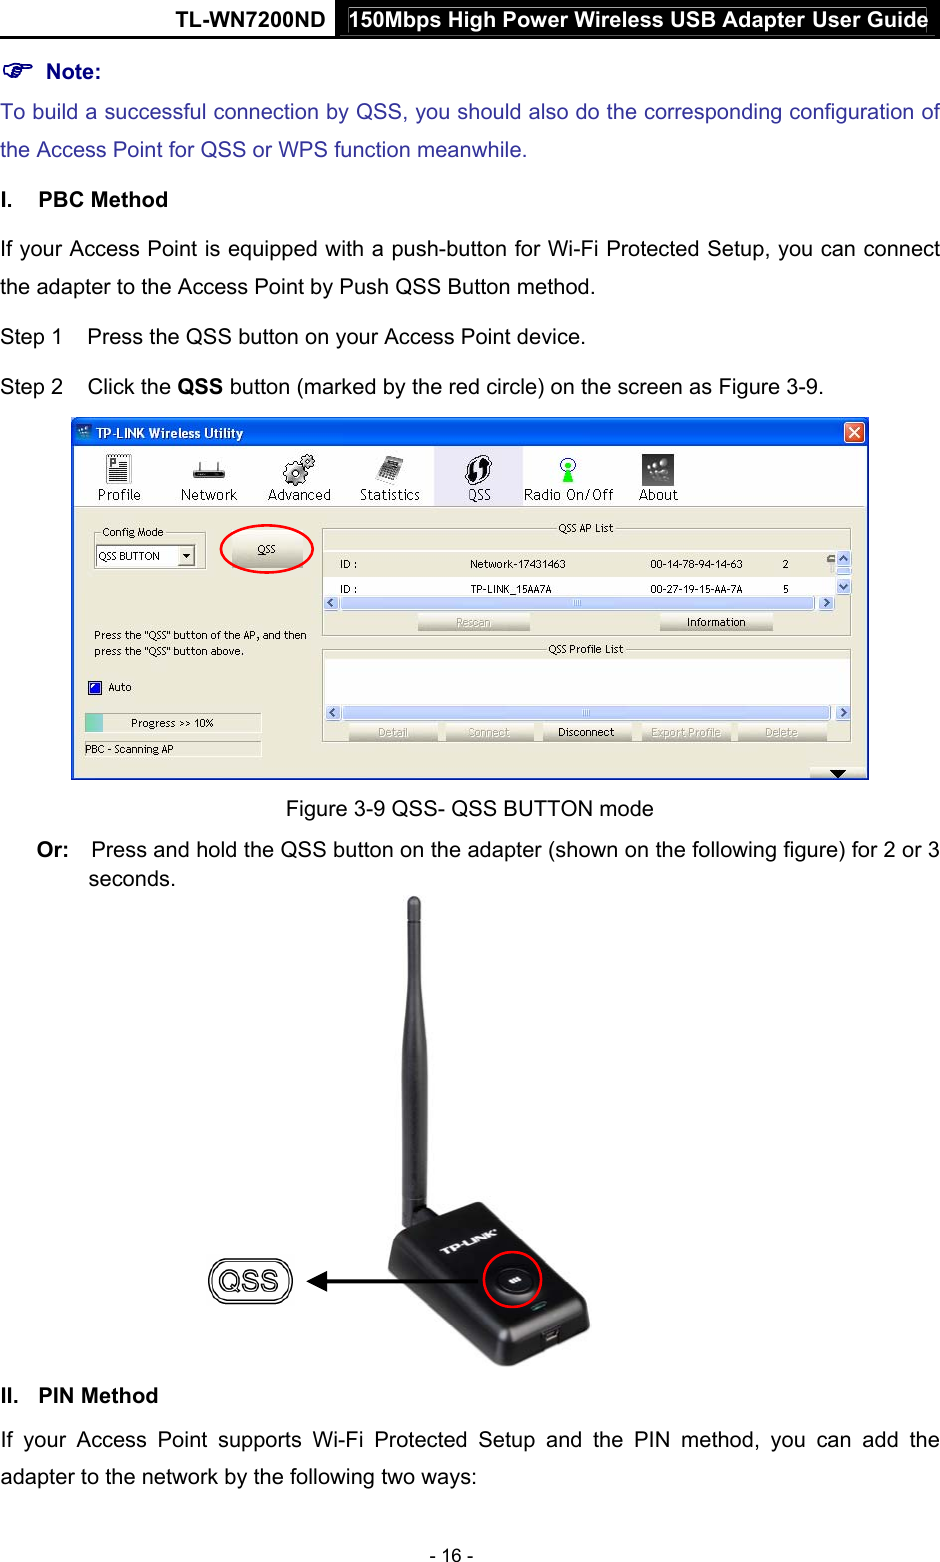 150Mbps High Power Wireless USB Adapter User GuideTL-WN7200ND  - 16 - ) Note:   To build a successful connection by QSS, you should also do the corresponding configuration of the Access Point for QSS or WPS function meanwhile. I. PBC Method If your Access Point is equipped with a push-button for Wi-Fi Protected Setup, you can connect the adapter to the Access Point by Push QSS Button method. Step 1  Press the QSS button on your Access Point device. Step 2  Click the QSS button (marked by the red circle) on the screen as Figure 3-9.  Figure 3-9 QSS- QSS BUTTON mode Or:  Press and hold the QSS button on the adapter (shown on the following figure) for 2 or 3 seconds.  II. PIN Method If your Access Point supports Wi-Fi Protected Setup and the PIN method, you can add the adapter to the network by the following two ways: 